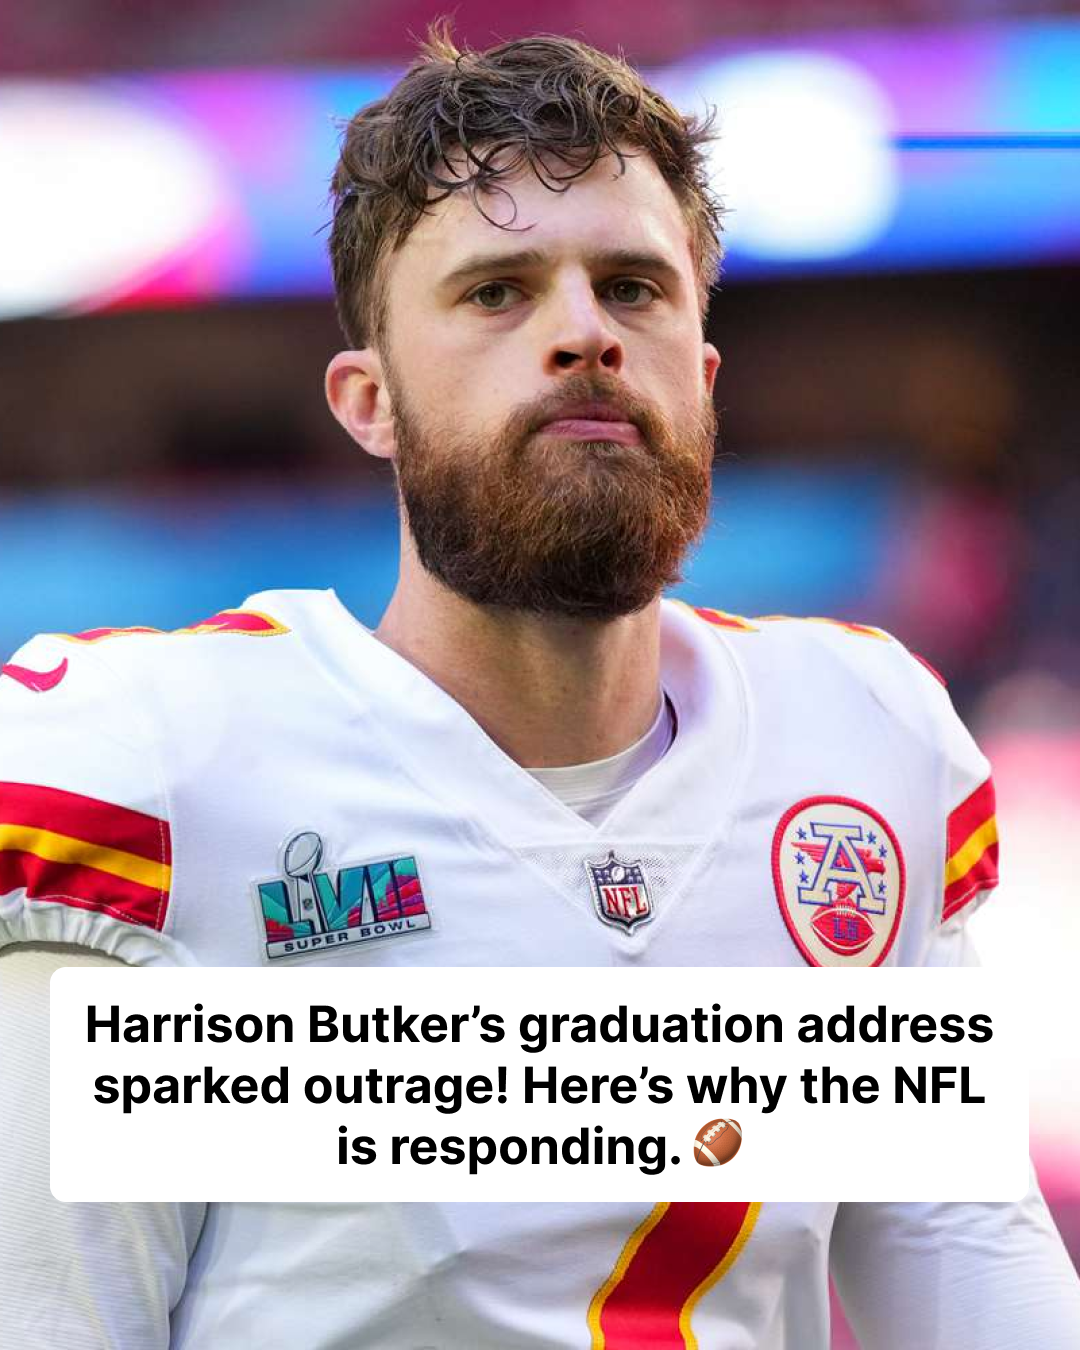 NFL Says They Do Not Agree with Harrison Butker’s ‘Views’ in Graduation Speech, Are Committed to ‘Inclusion’